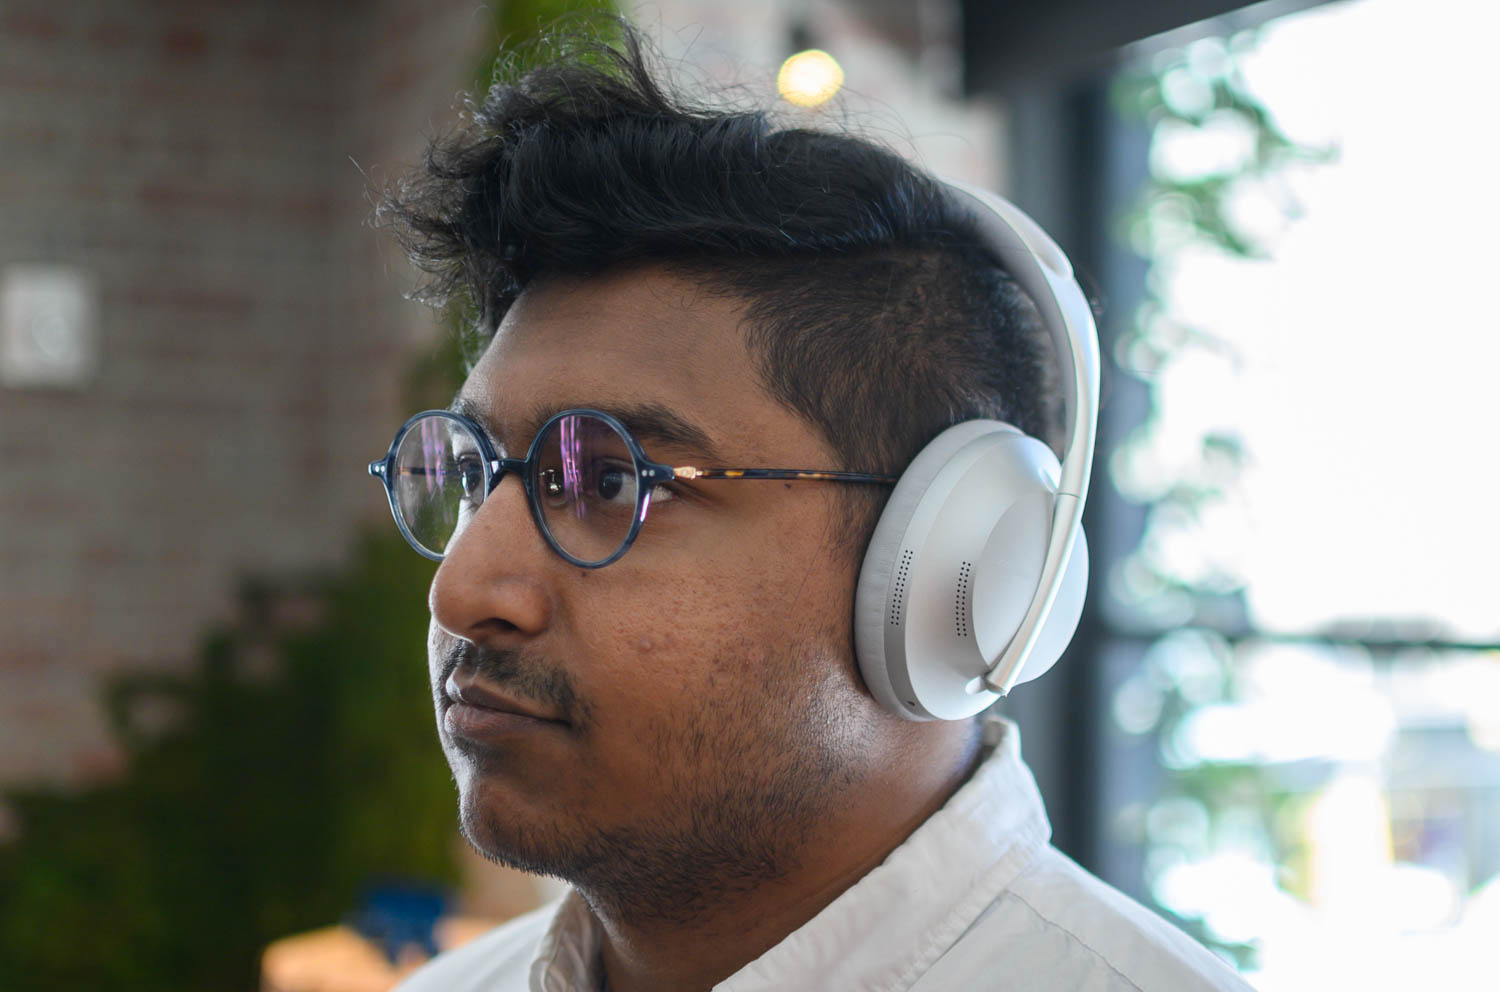 Bose Noise Cancelling Headphones 700 Review | Built for business